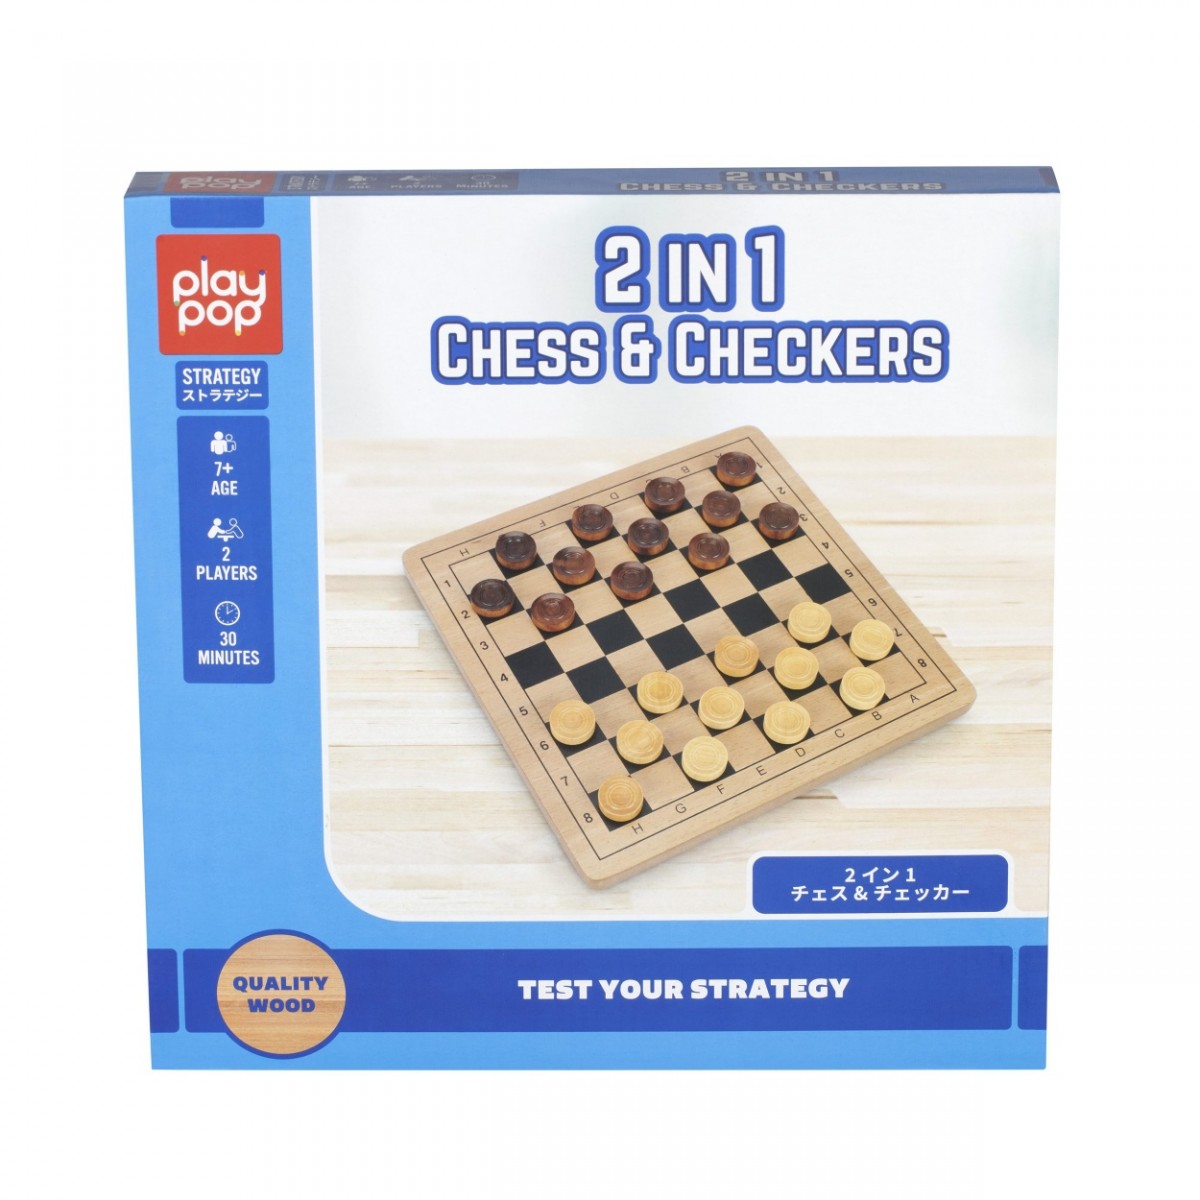 2 in 1 Chess and Checkers Board Game at Toys R Us UK